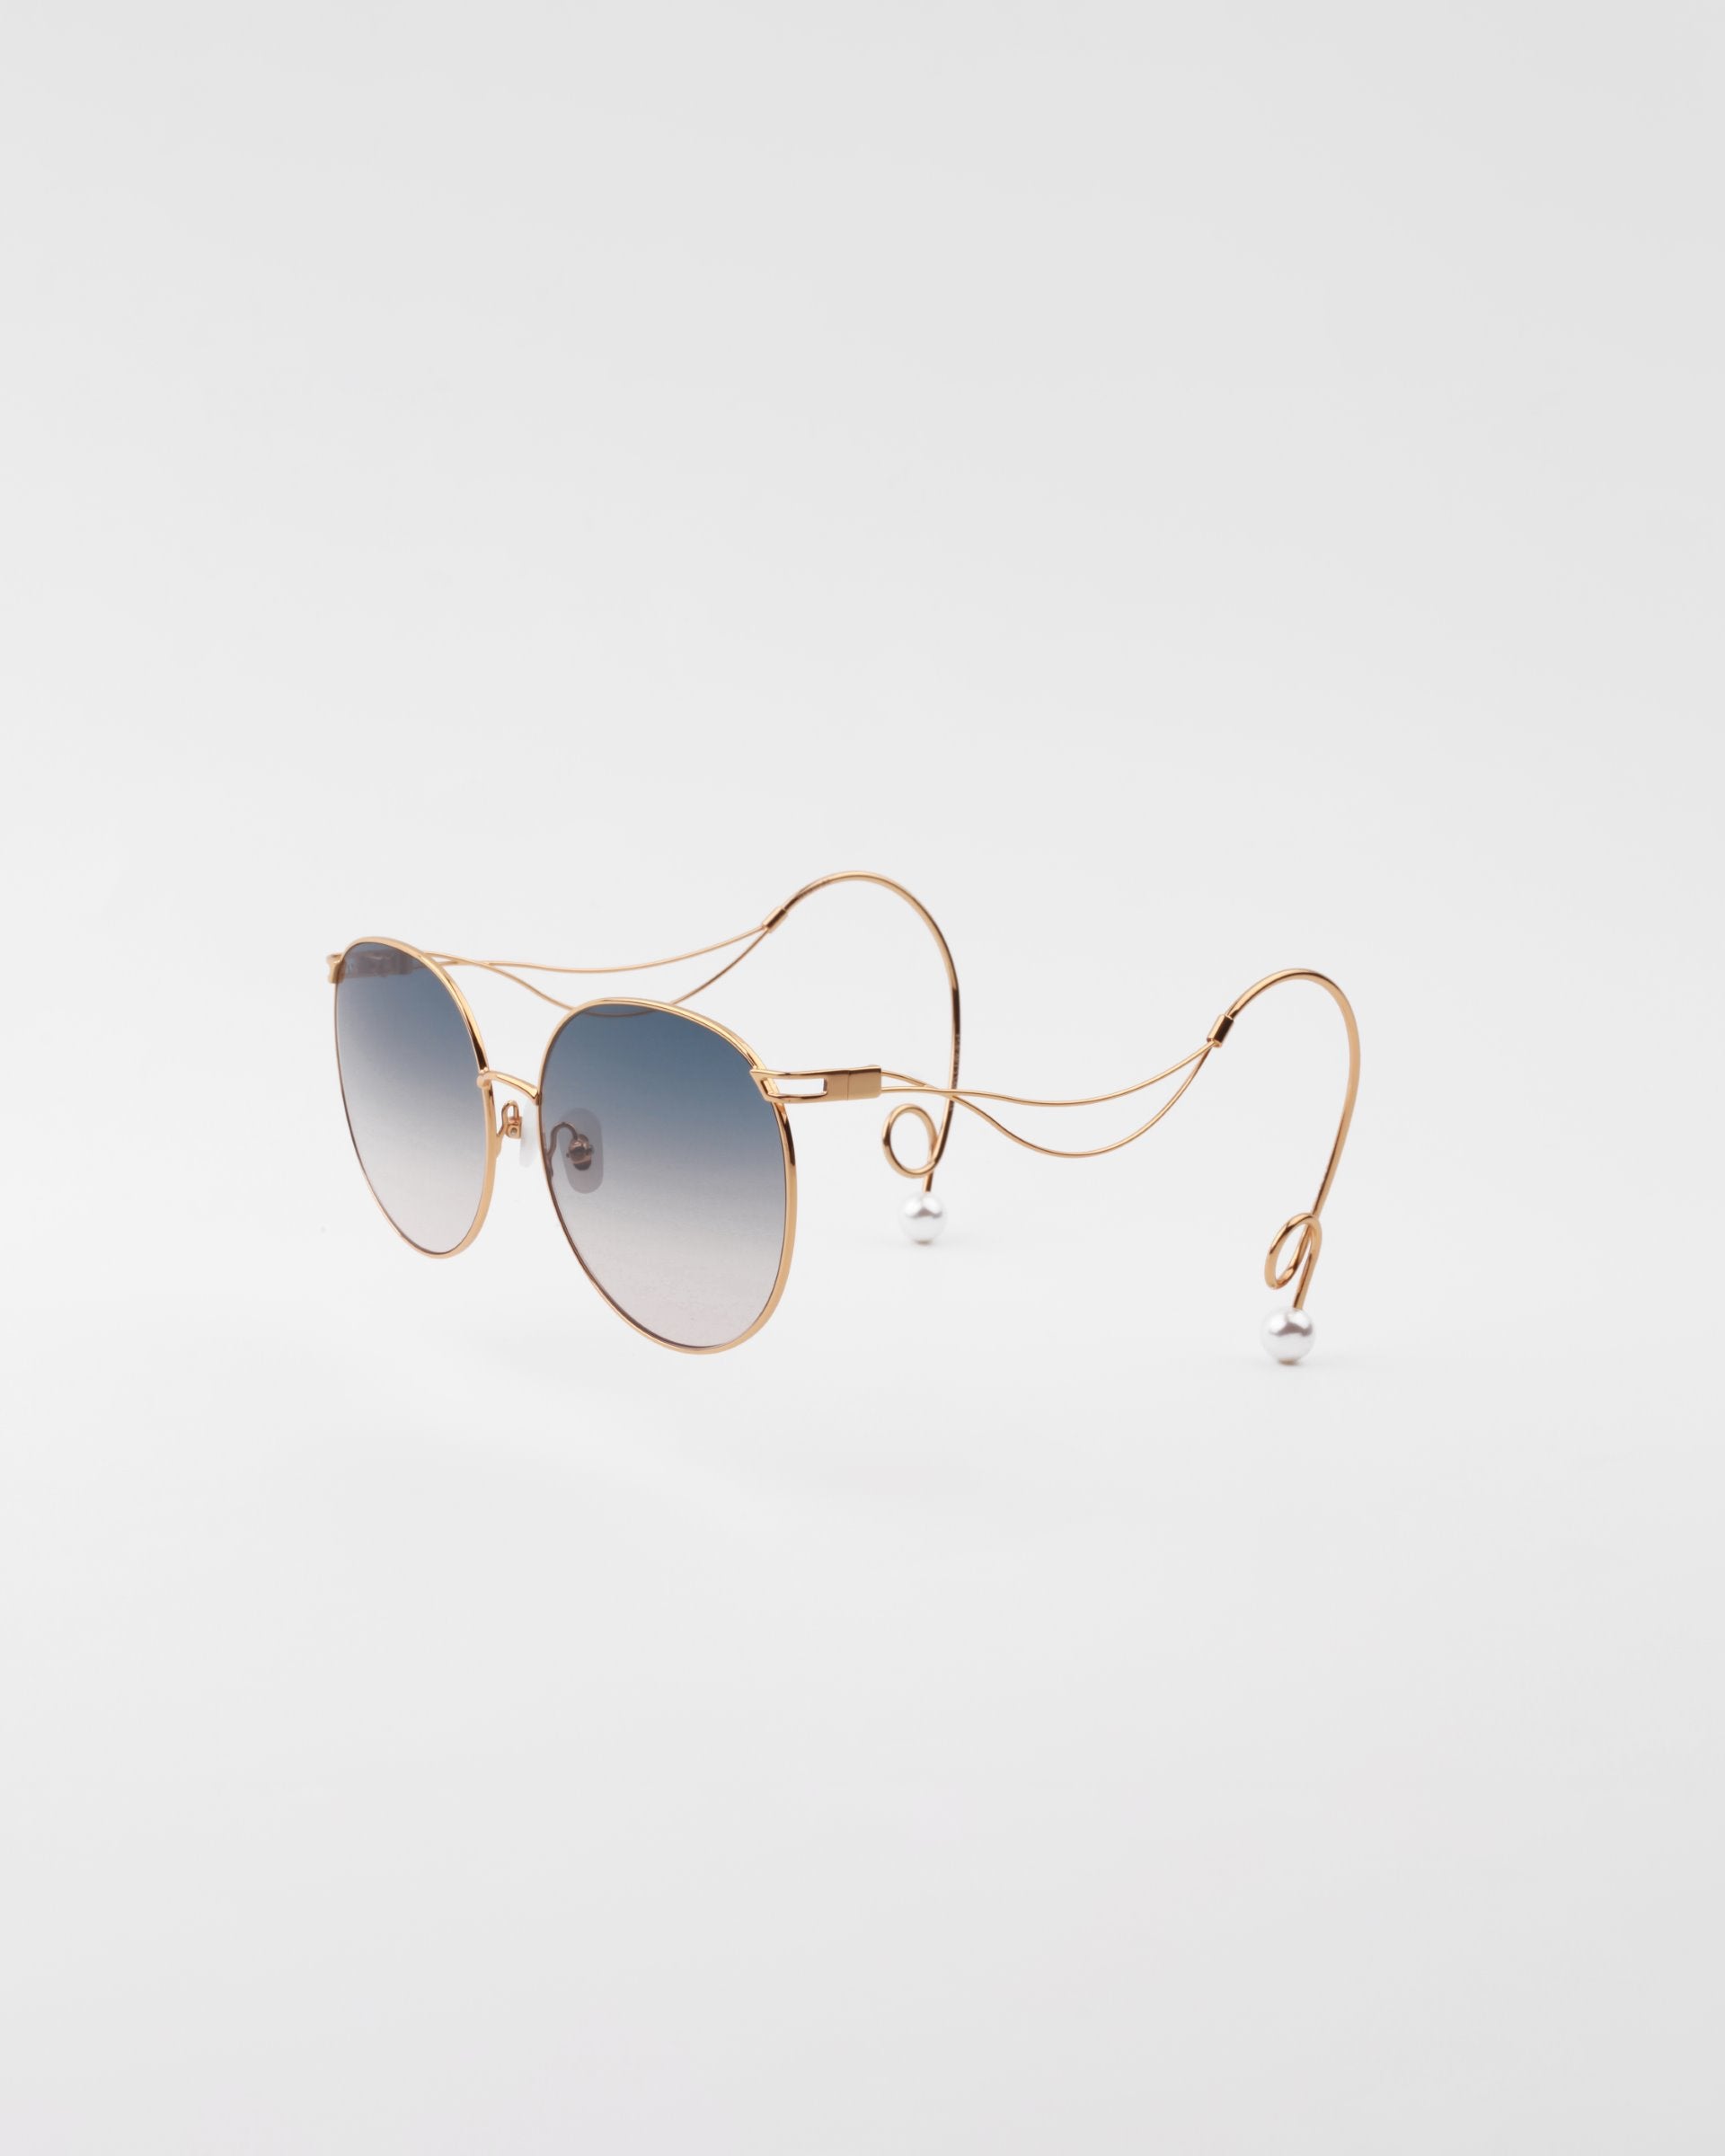 A pair of sunglasses featuring round, lightweight shatter-resistant lenses with a gradient from dark to light shades. The handmade gold-plated frame has thin, intricate wire temples that curve and loop at the ends, with hypoallergenic nose pads adding comfort to this unique and stylish Birthday Cake design by For Art's Sake® against a plain white background.